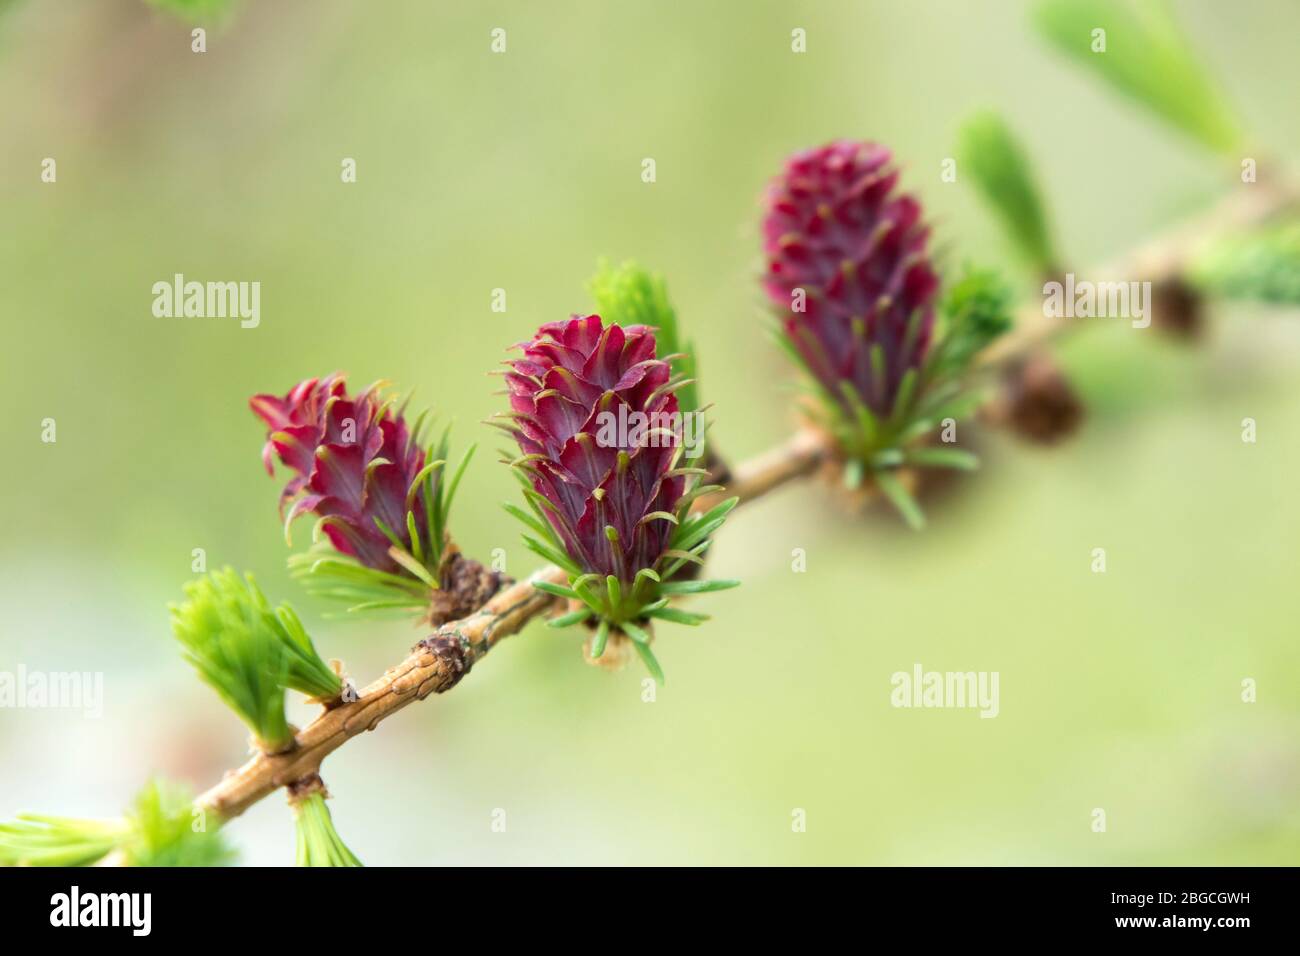 The Female Flowers of the European Larch Tree Larix decidua, UK. The purple flowers develop into the cones as they mature. Stock Photo